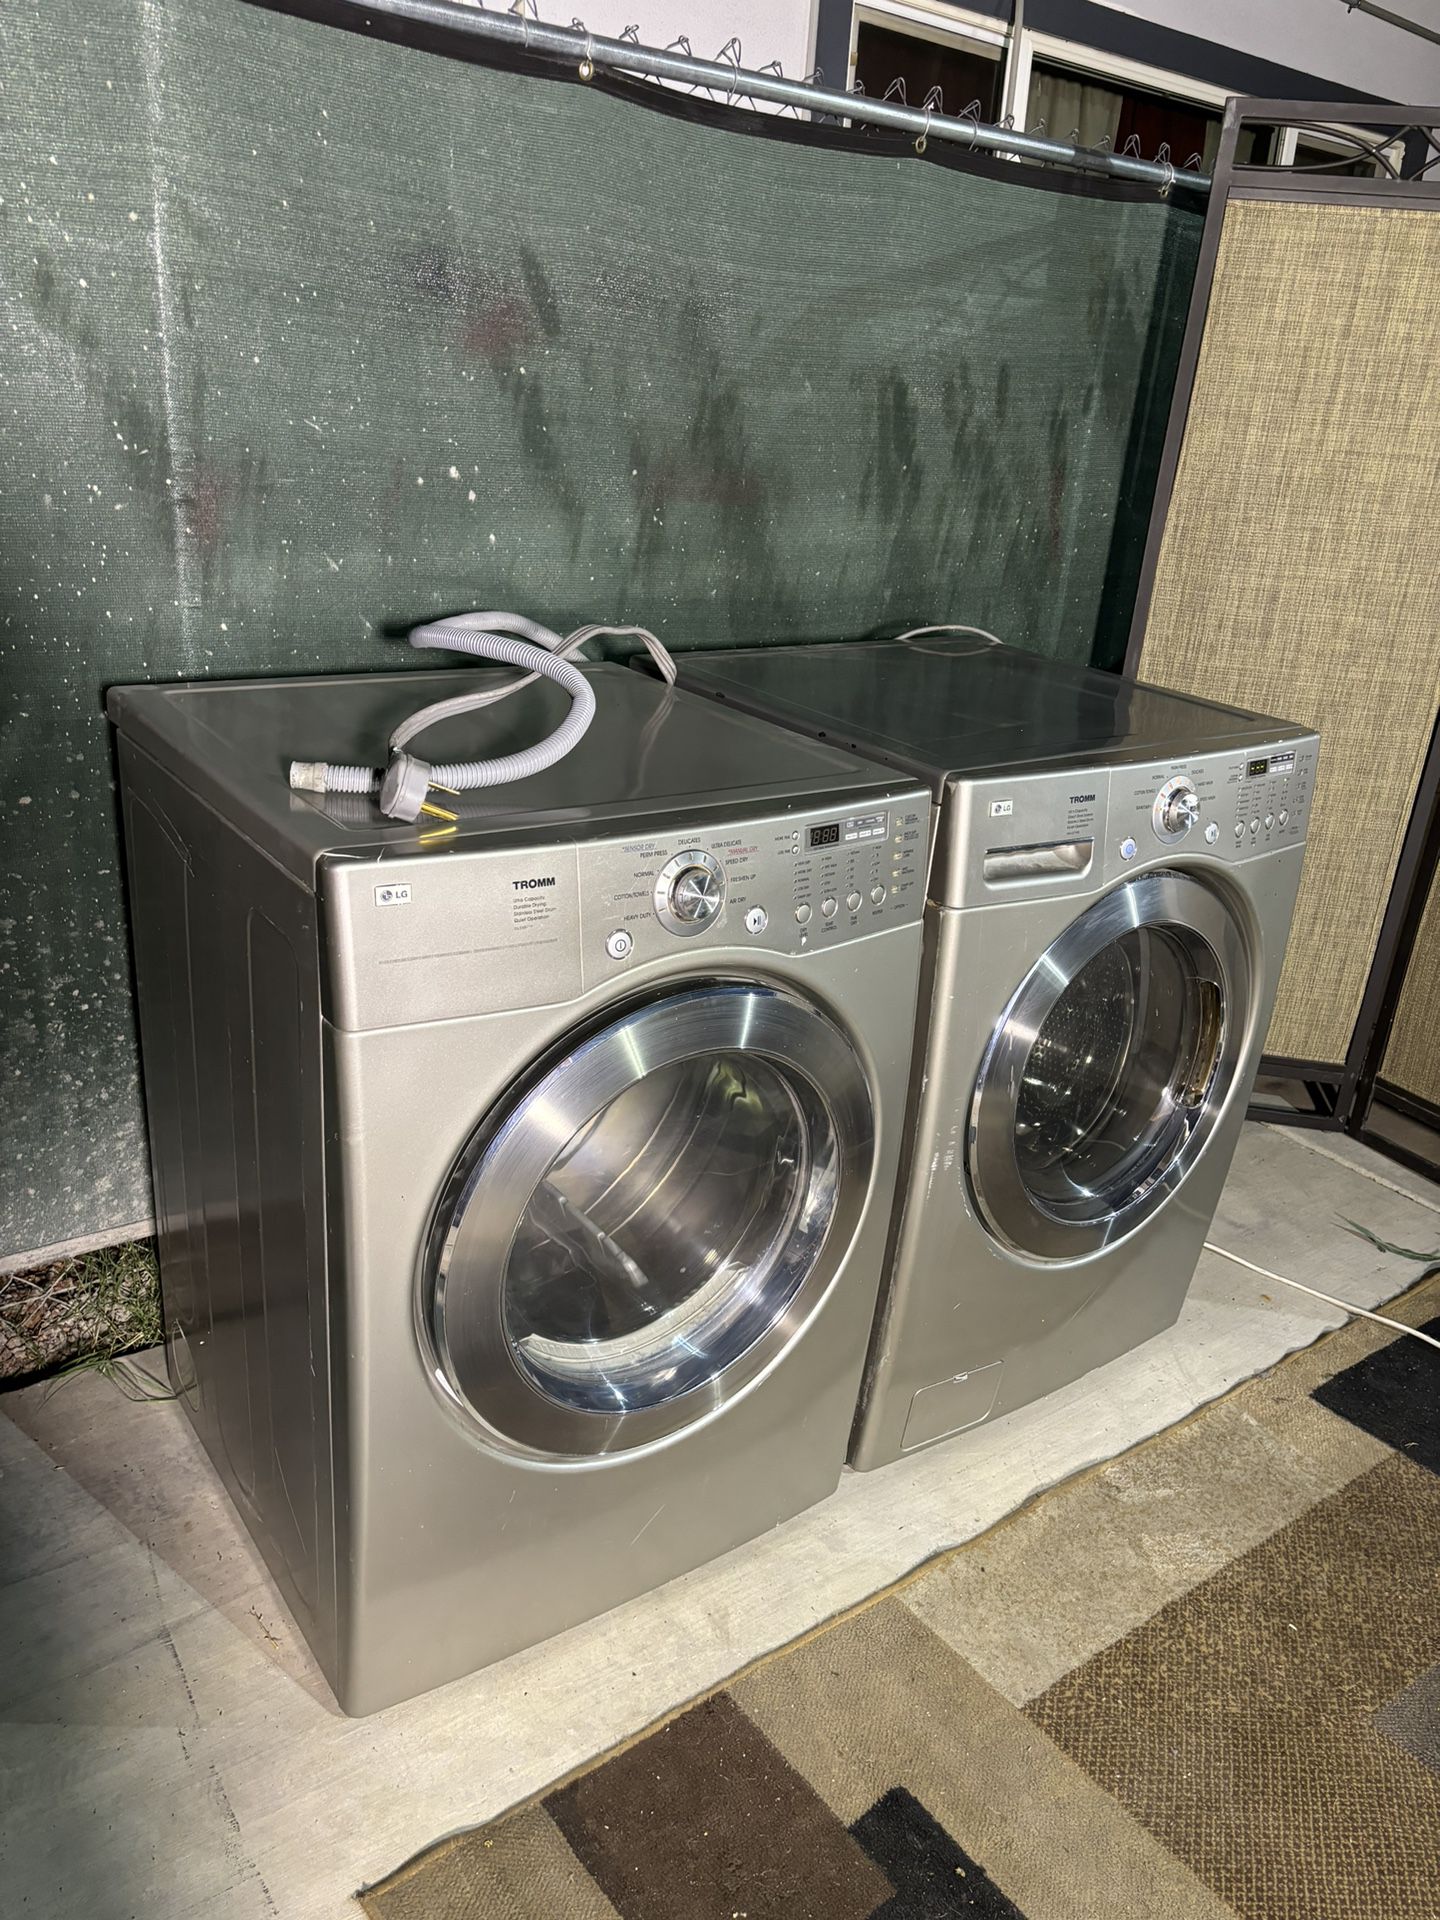 LG TROM WASHER & DRYER SET ..FREE DELIVERY AVAILABLE 🚛🚛